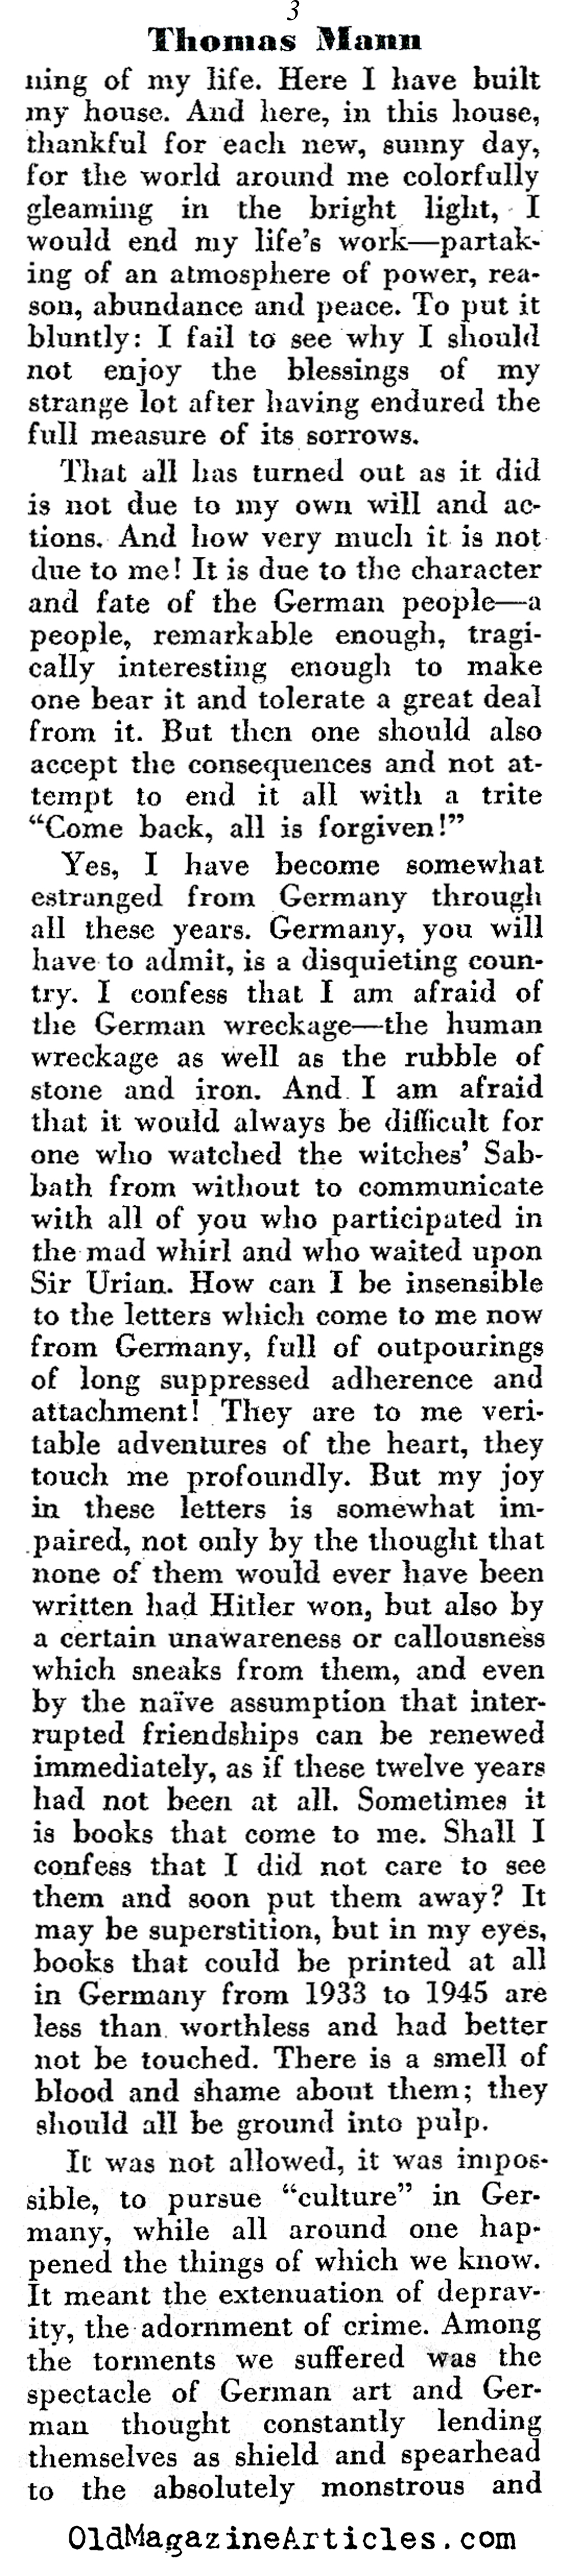 ''A Letter to Germany'' by Thomas Mann (Prevent W.W. III Magazine, 1945)